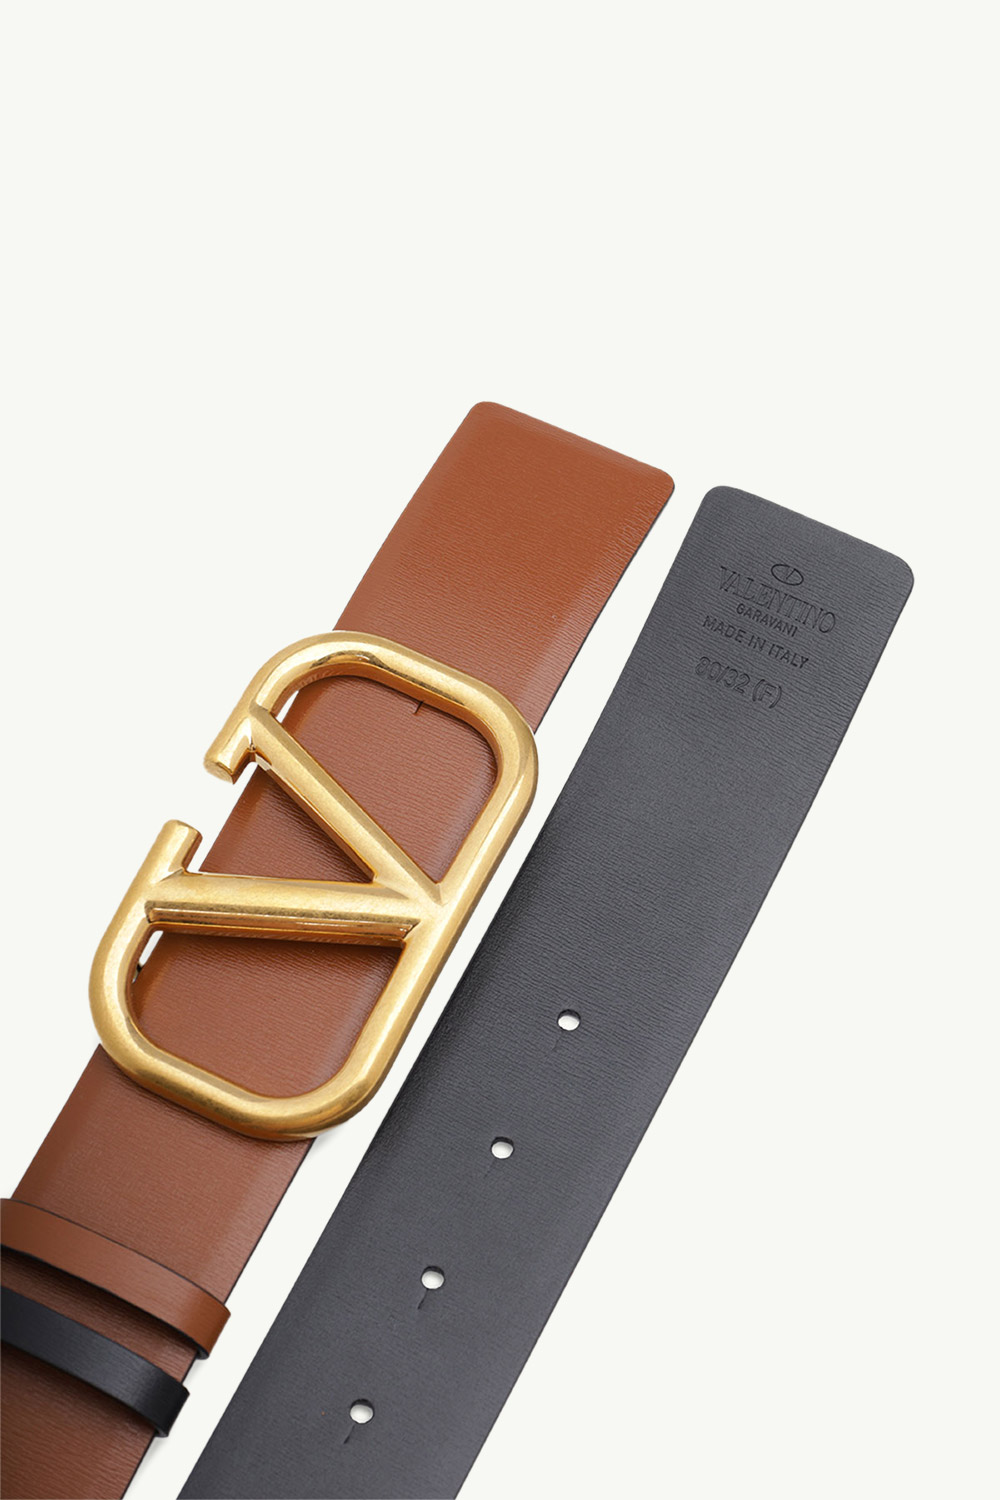 VALENTINO Reversible Belt 4cm in Black/Brown Leather with VLogo Buckle 3